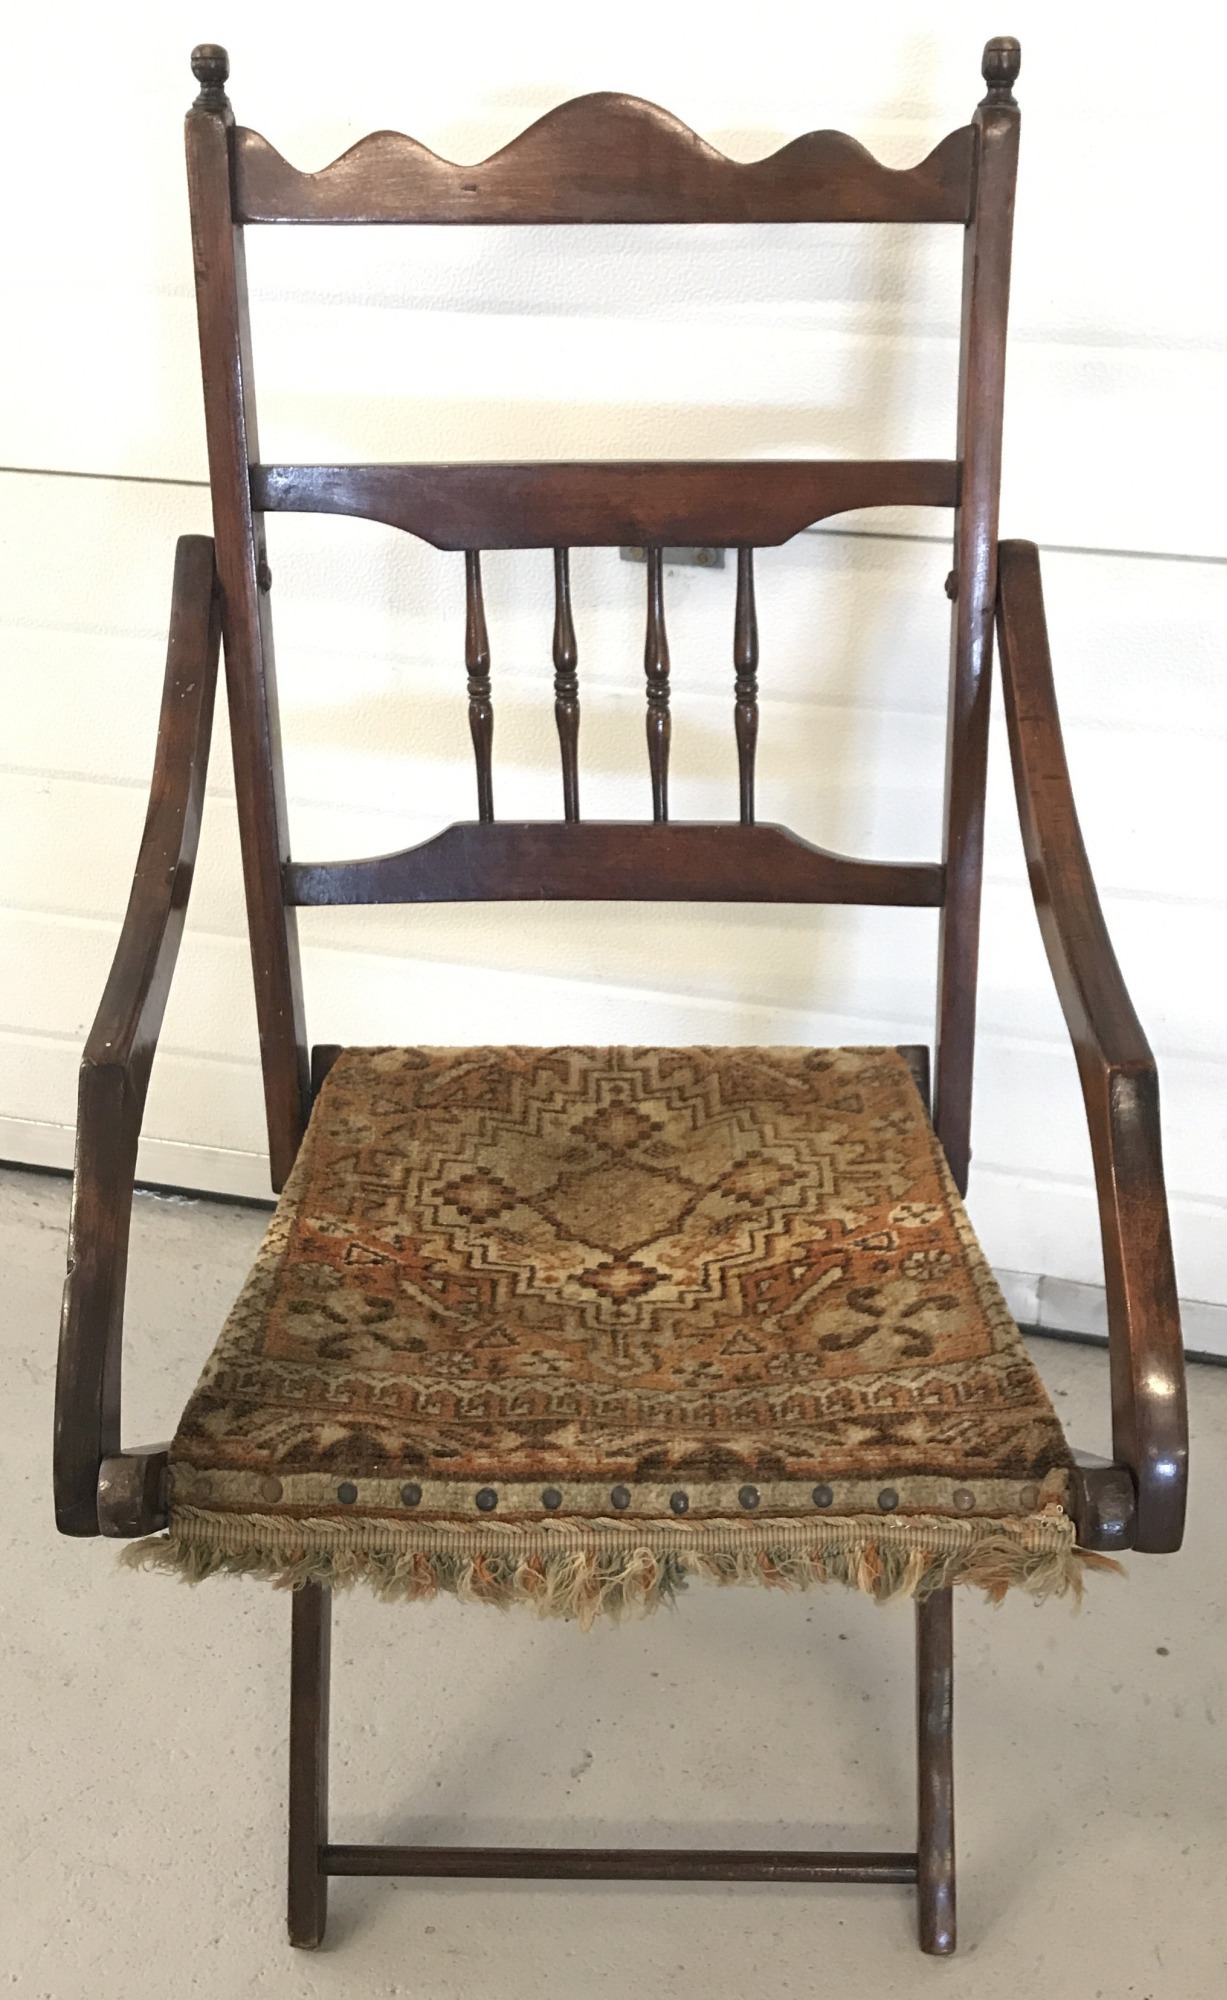 A vintage folding dark wood chair with carpet seat and spindle decoration to back.